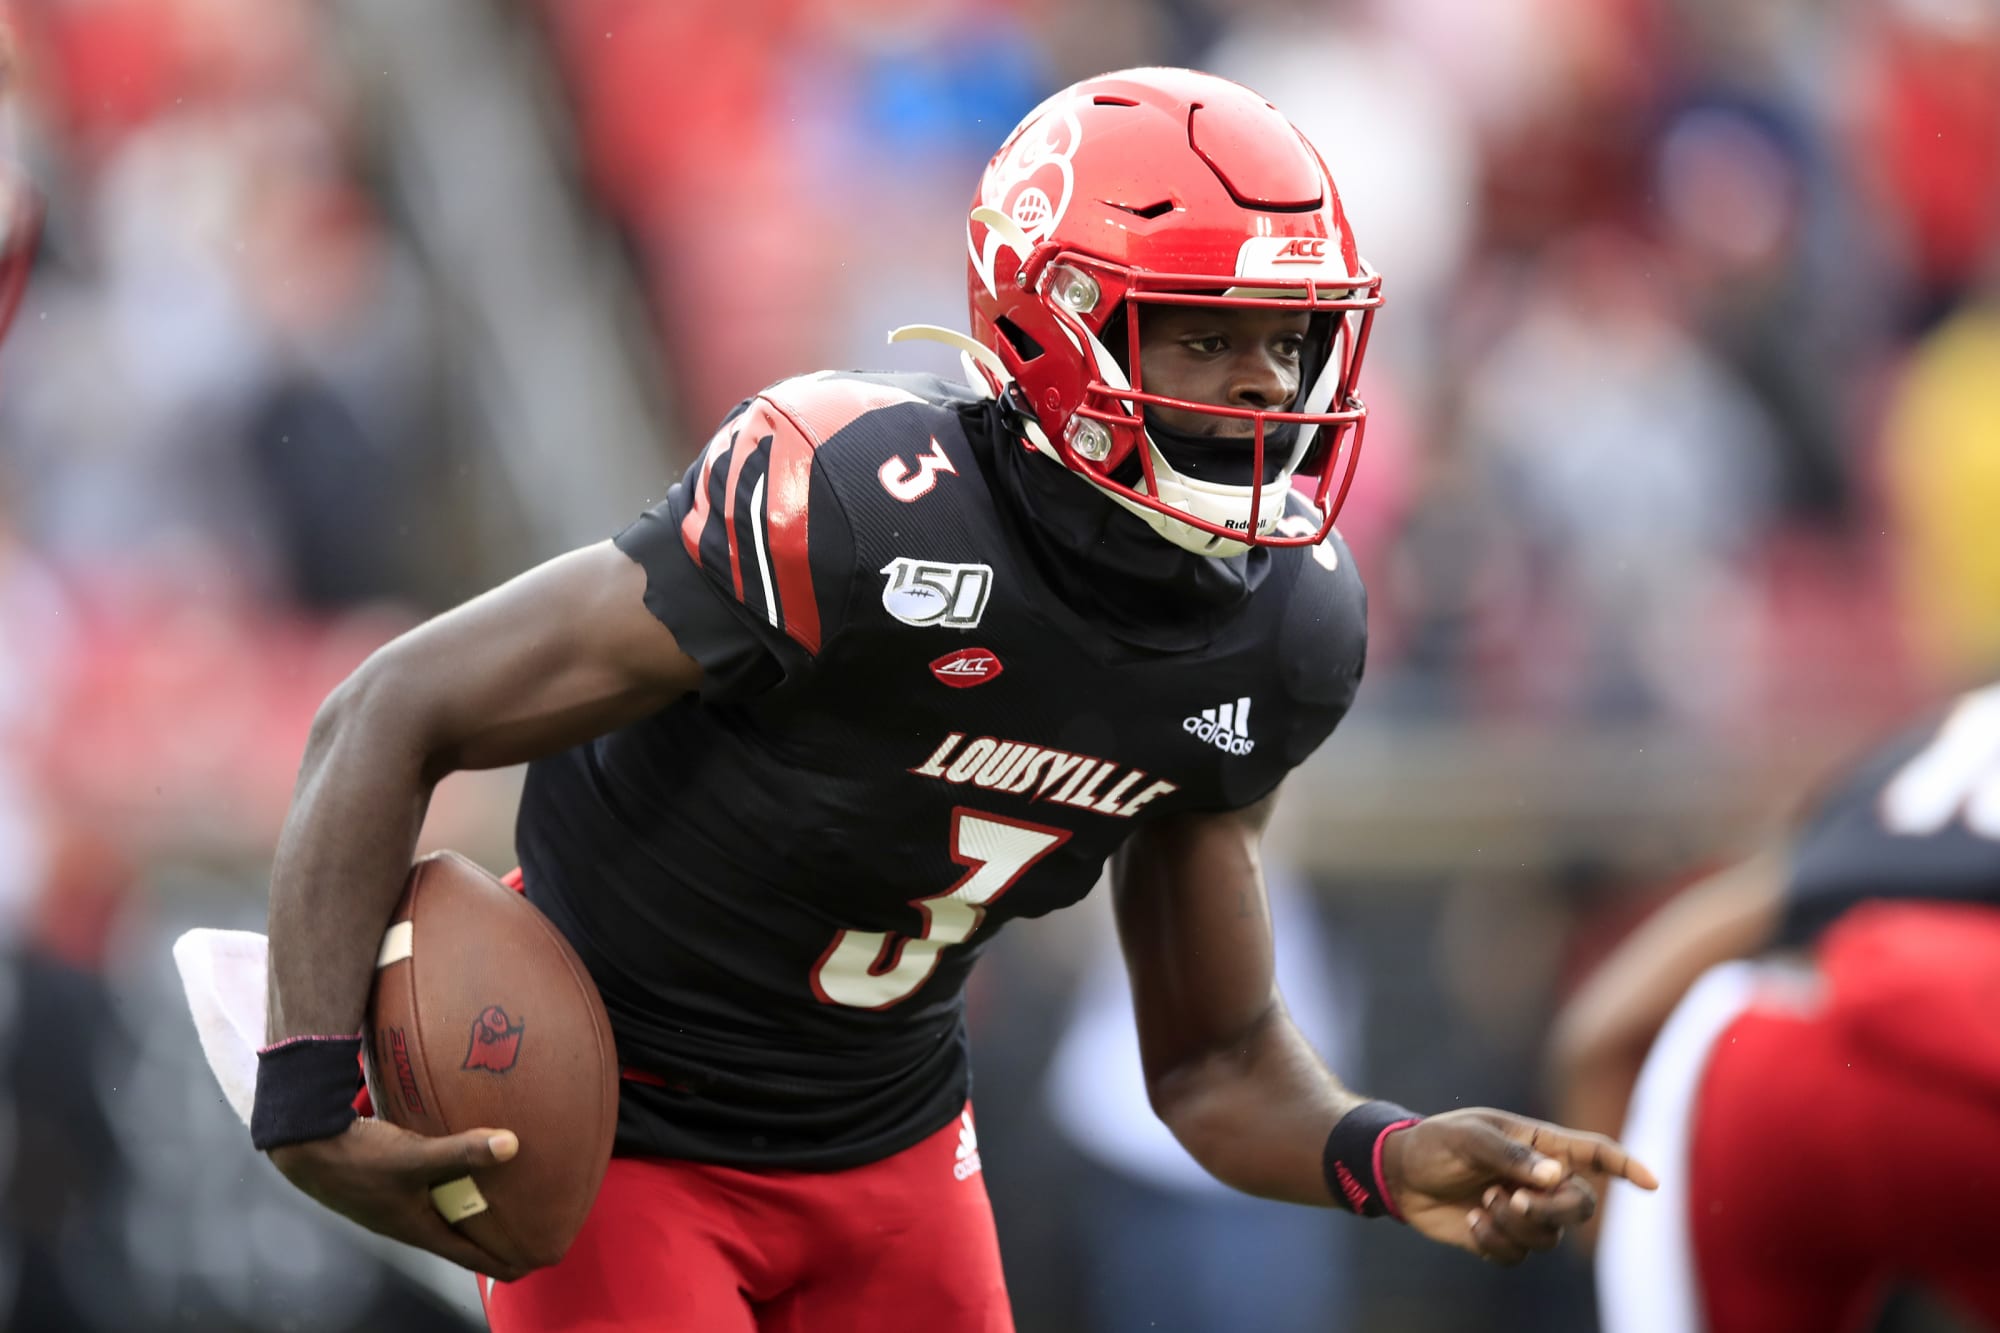 Louisville Football: Top 4 prospects for the 2021 NFL Draft - Page 2